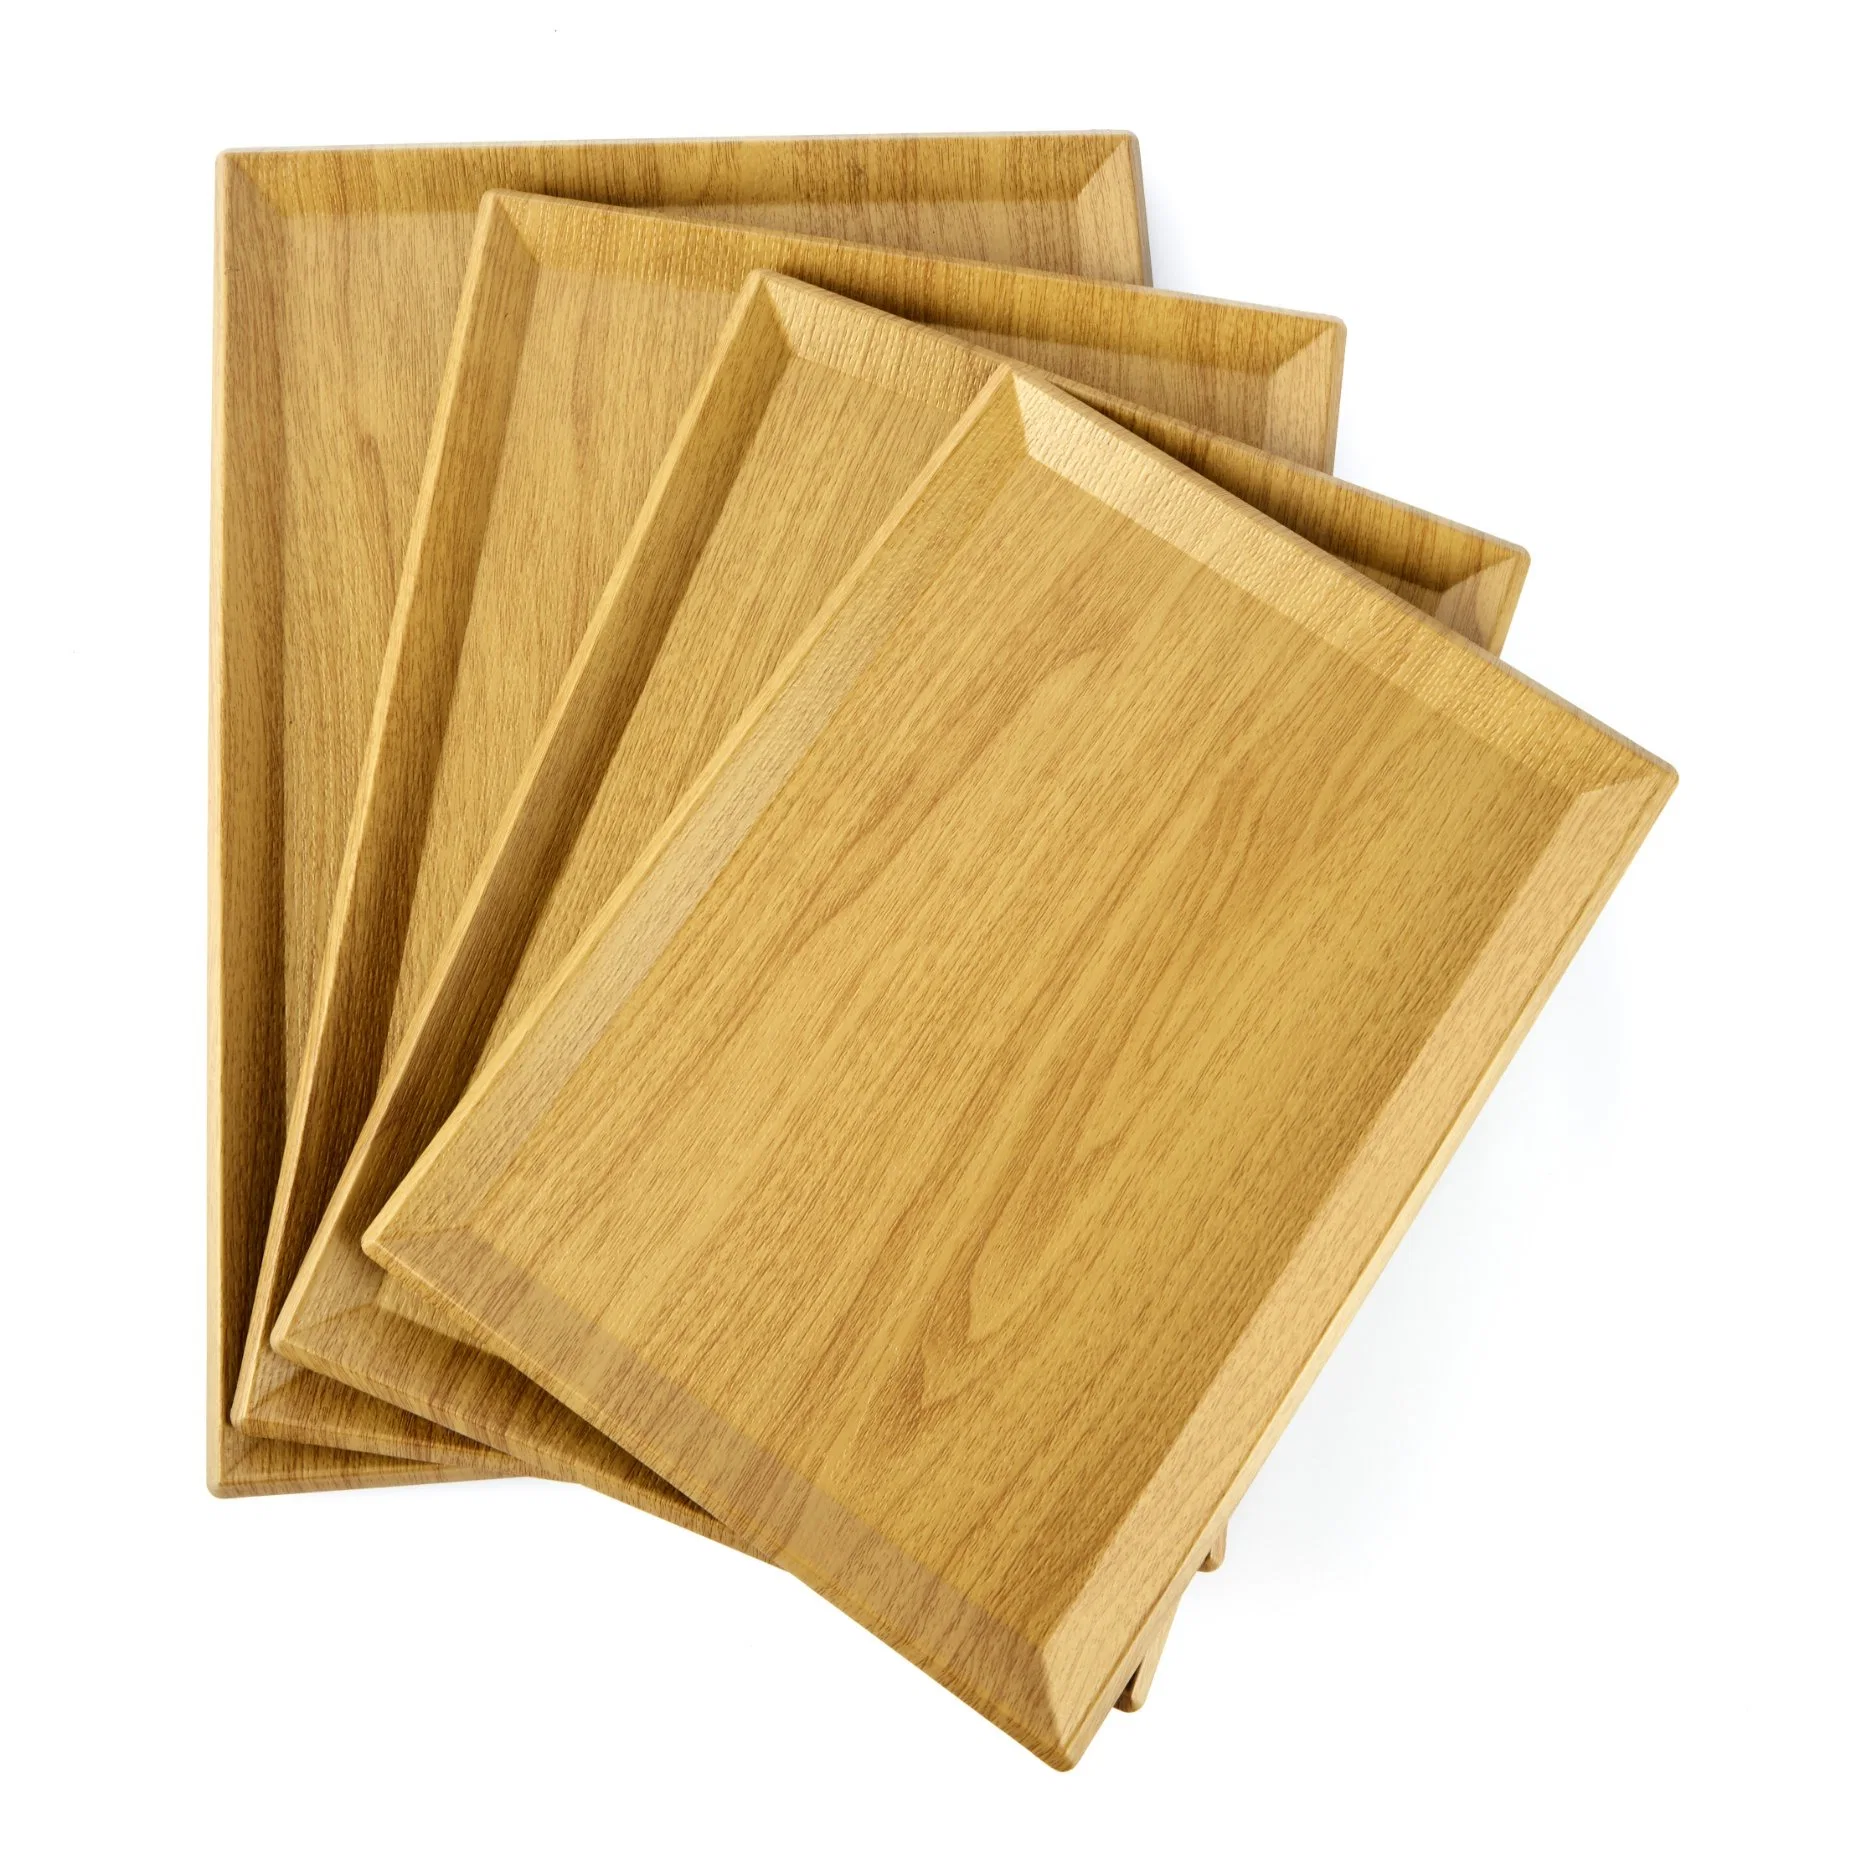 Wooden Design Rectangle Plastic Trays with Different Sizes